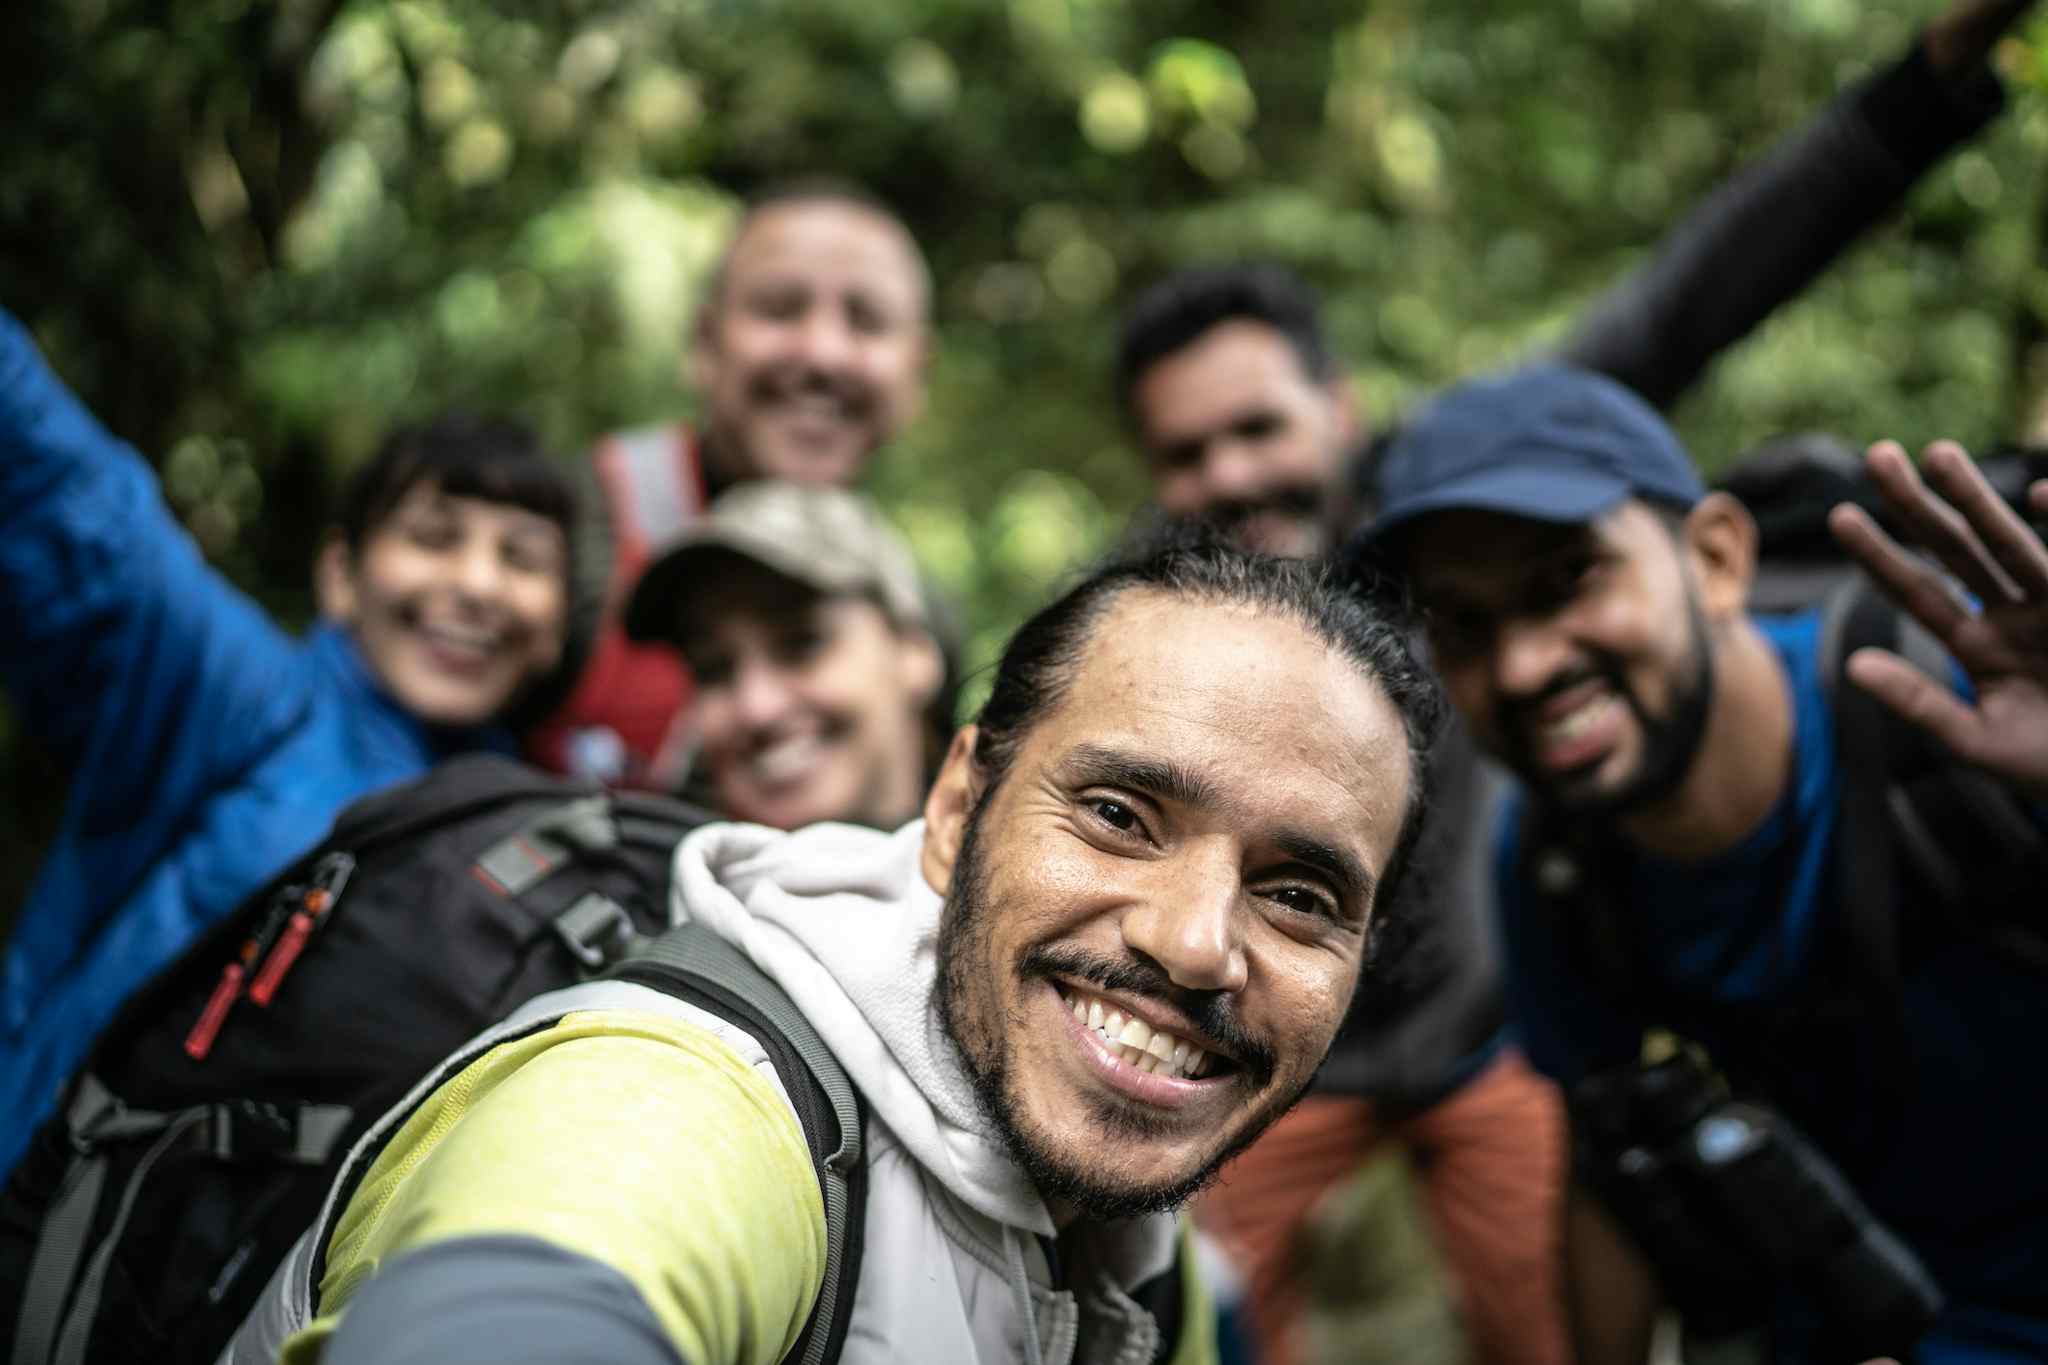 A group of smiling Camino de Costa Rica hikers in the forest, Costa Rica.